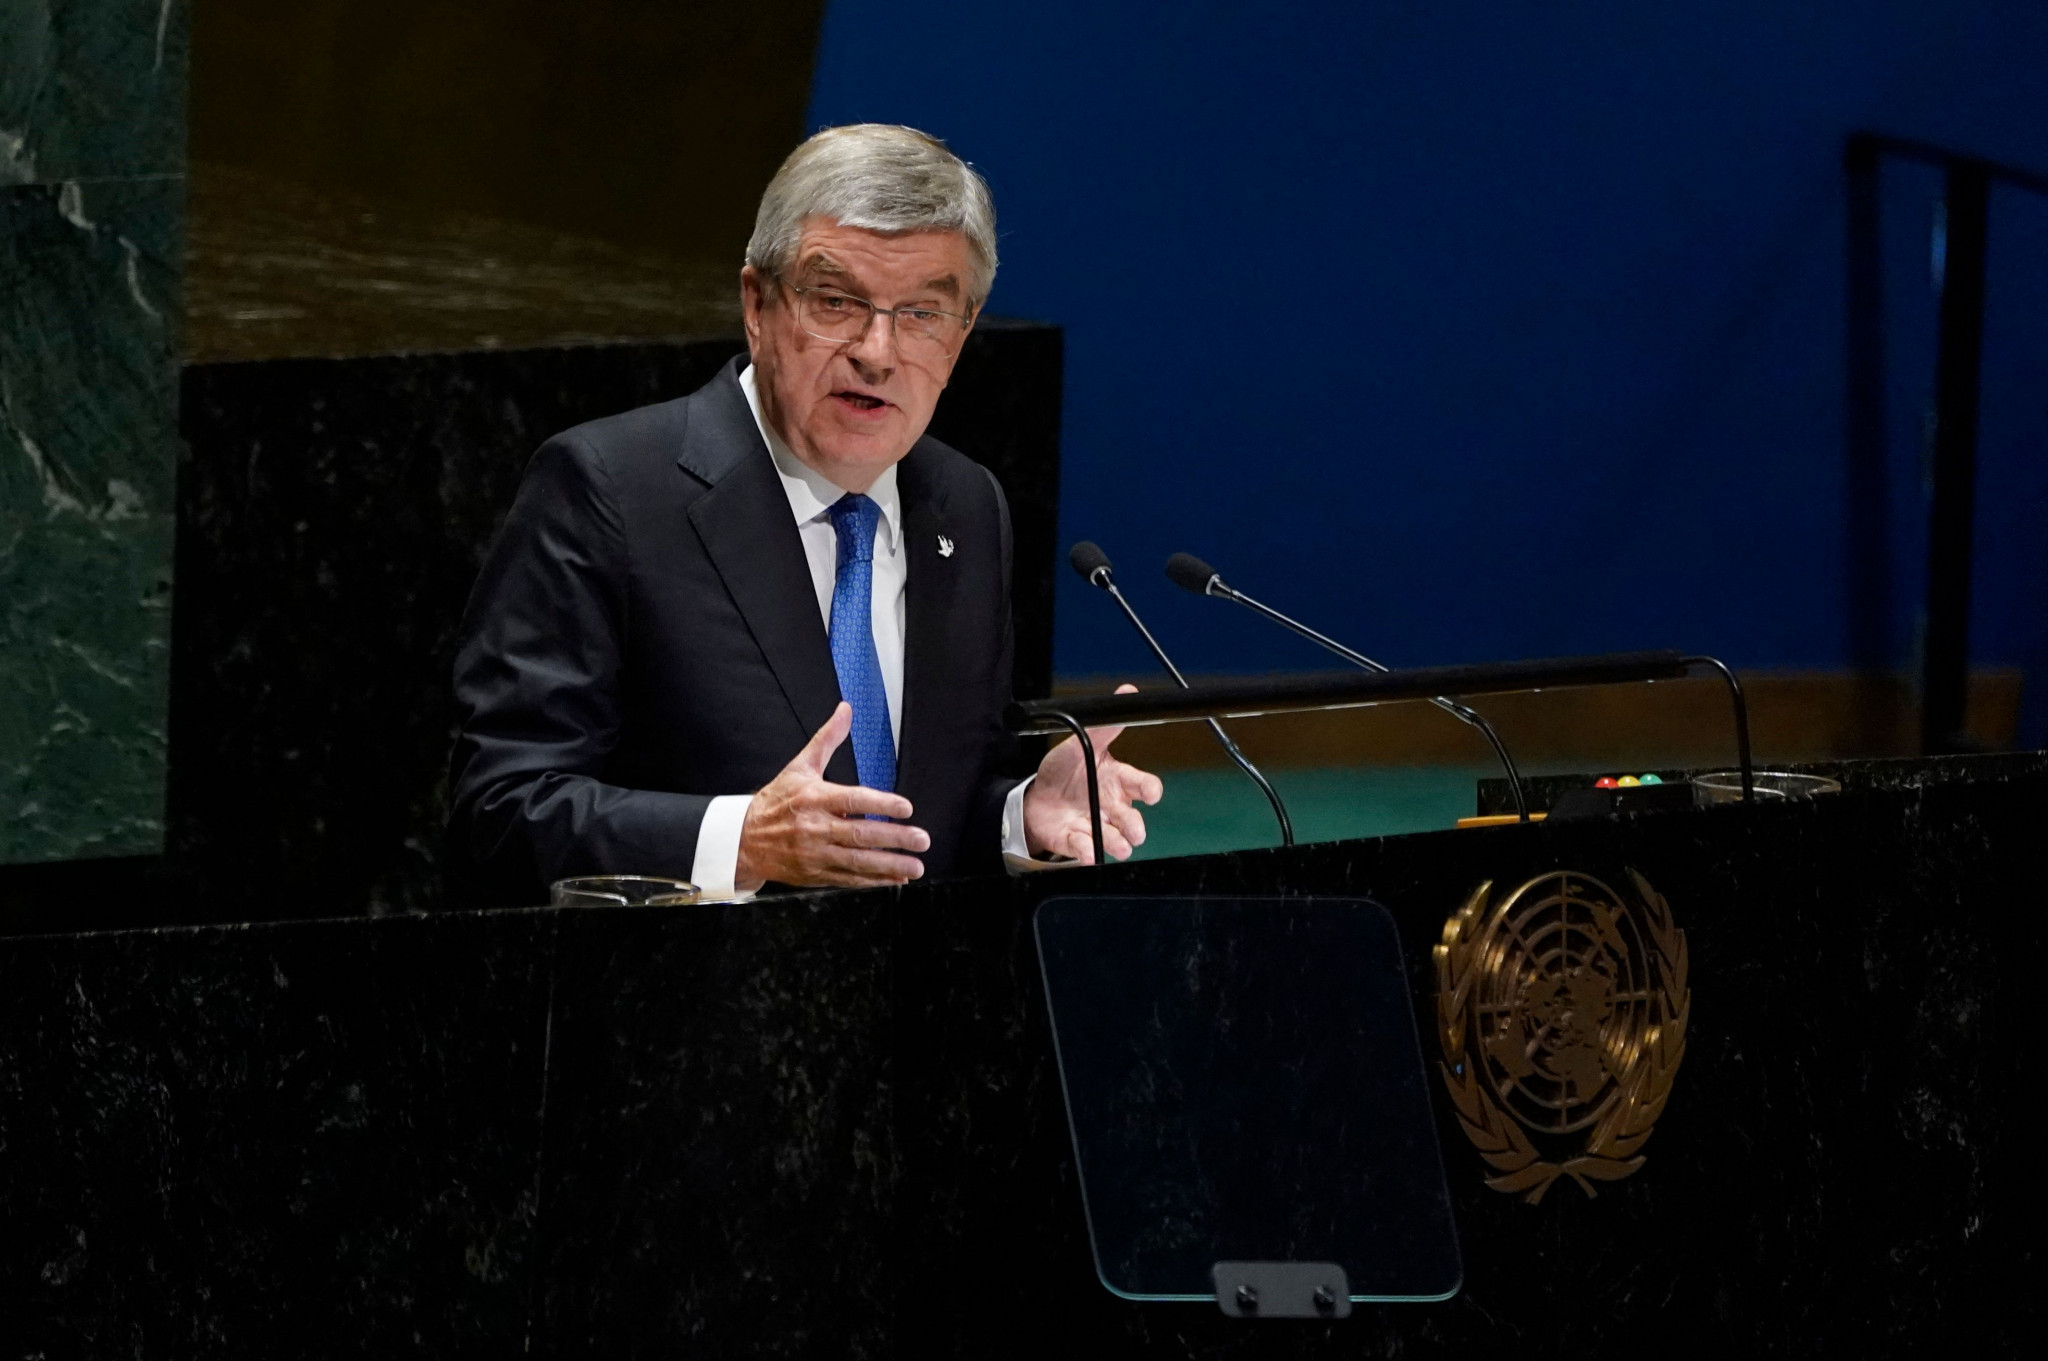 Thomas Bach, President of International Olympic Committee speaks at the UN in New York ©Getty Images